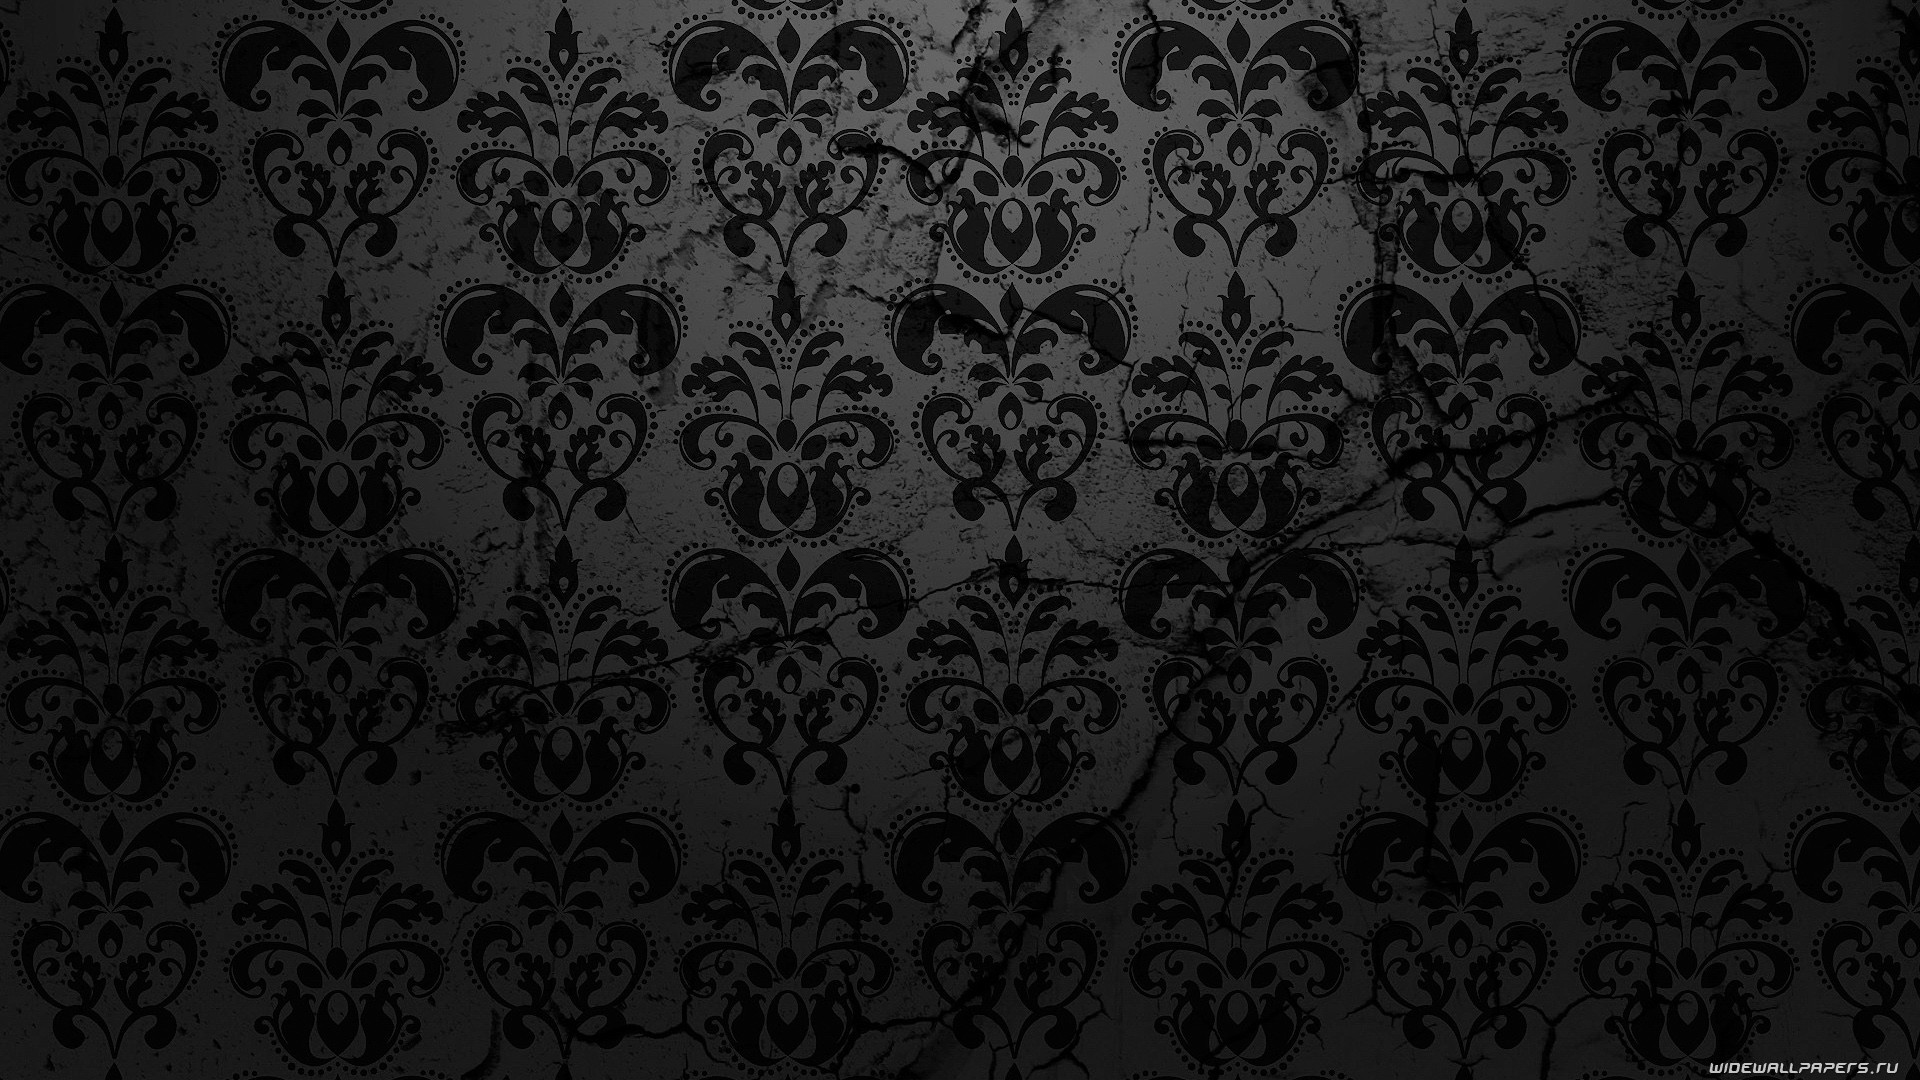 1920x1080 ... backgrounds for black lace wallpaper background www 8backgrounds com ...